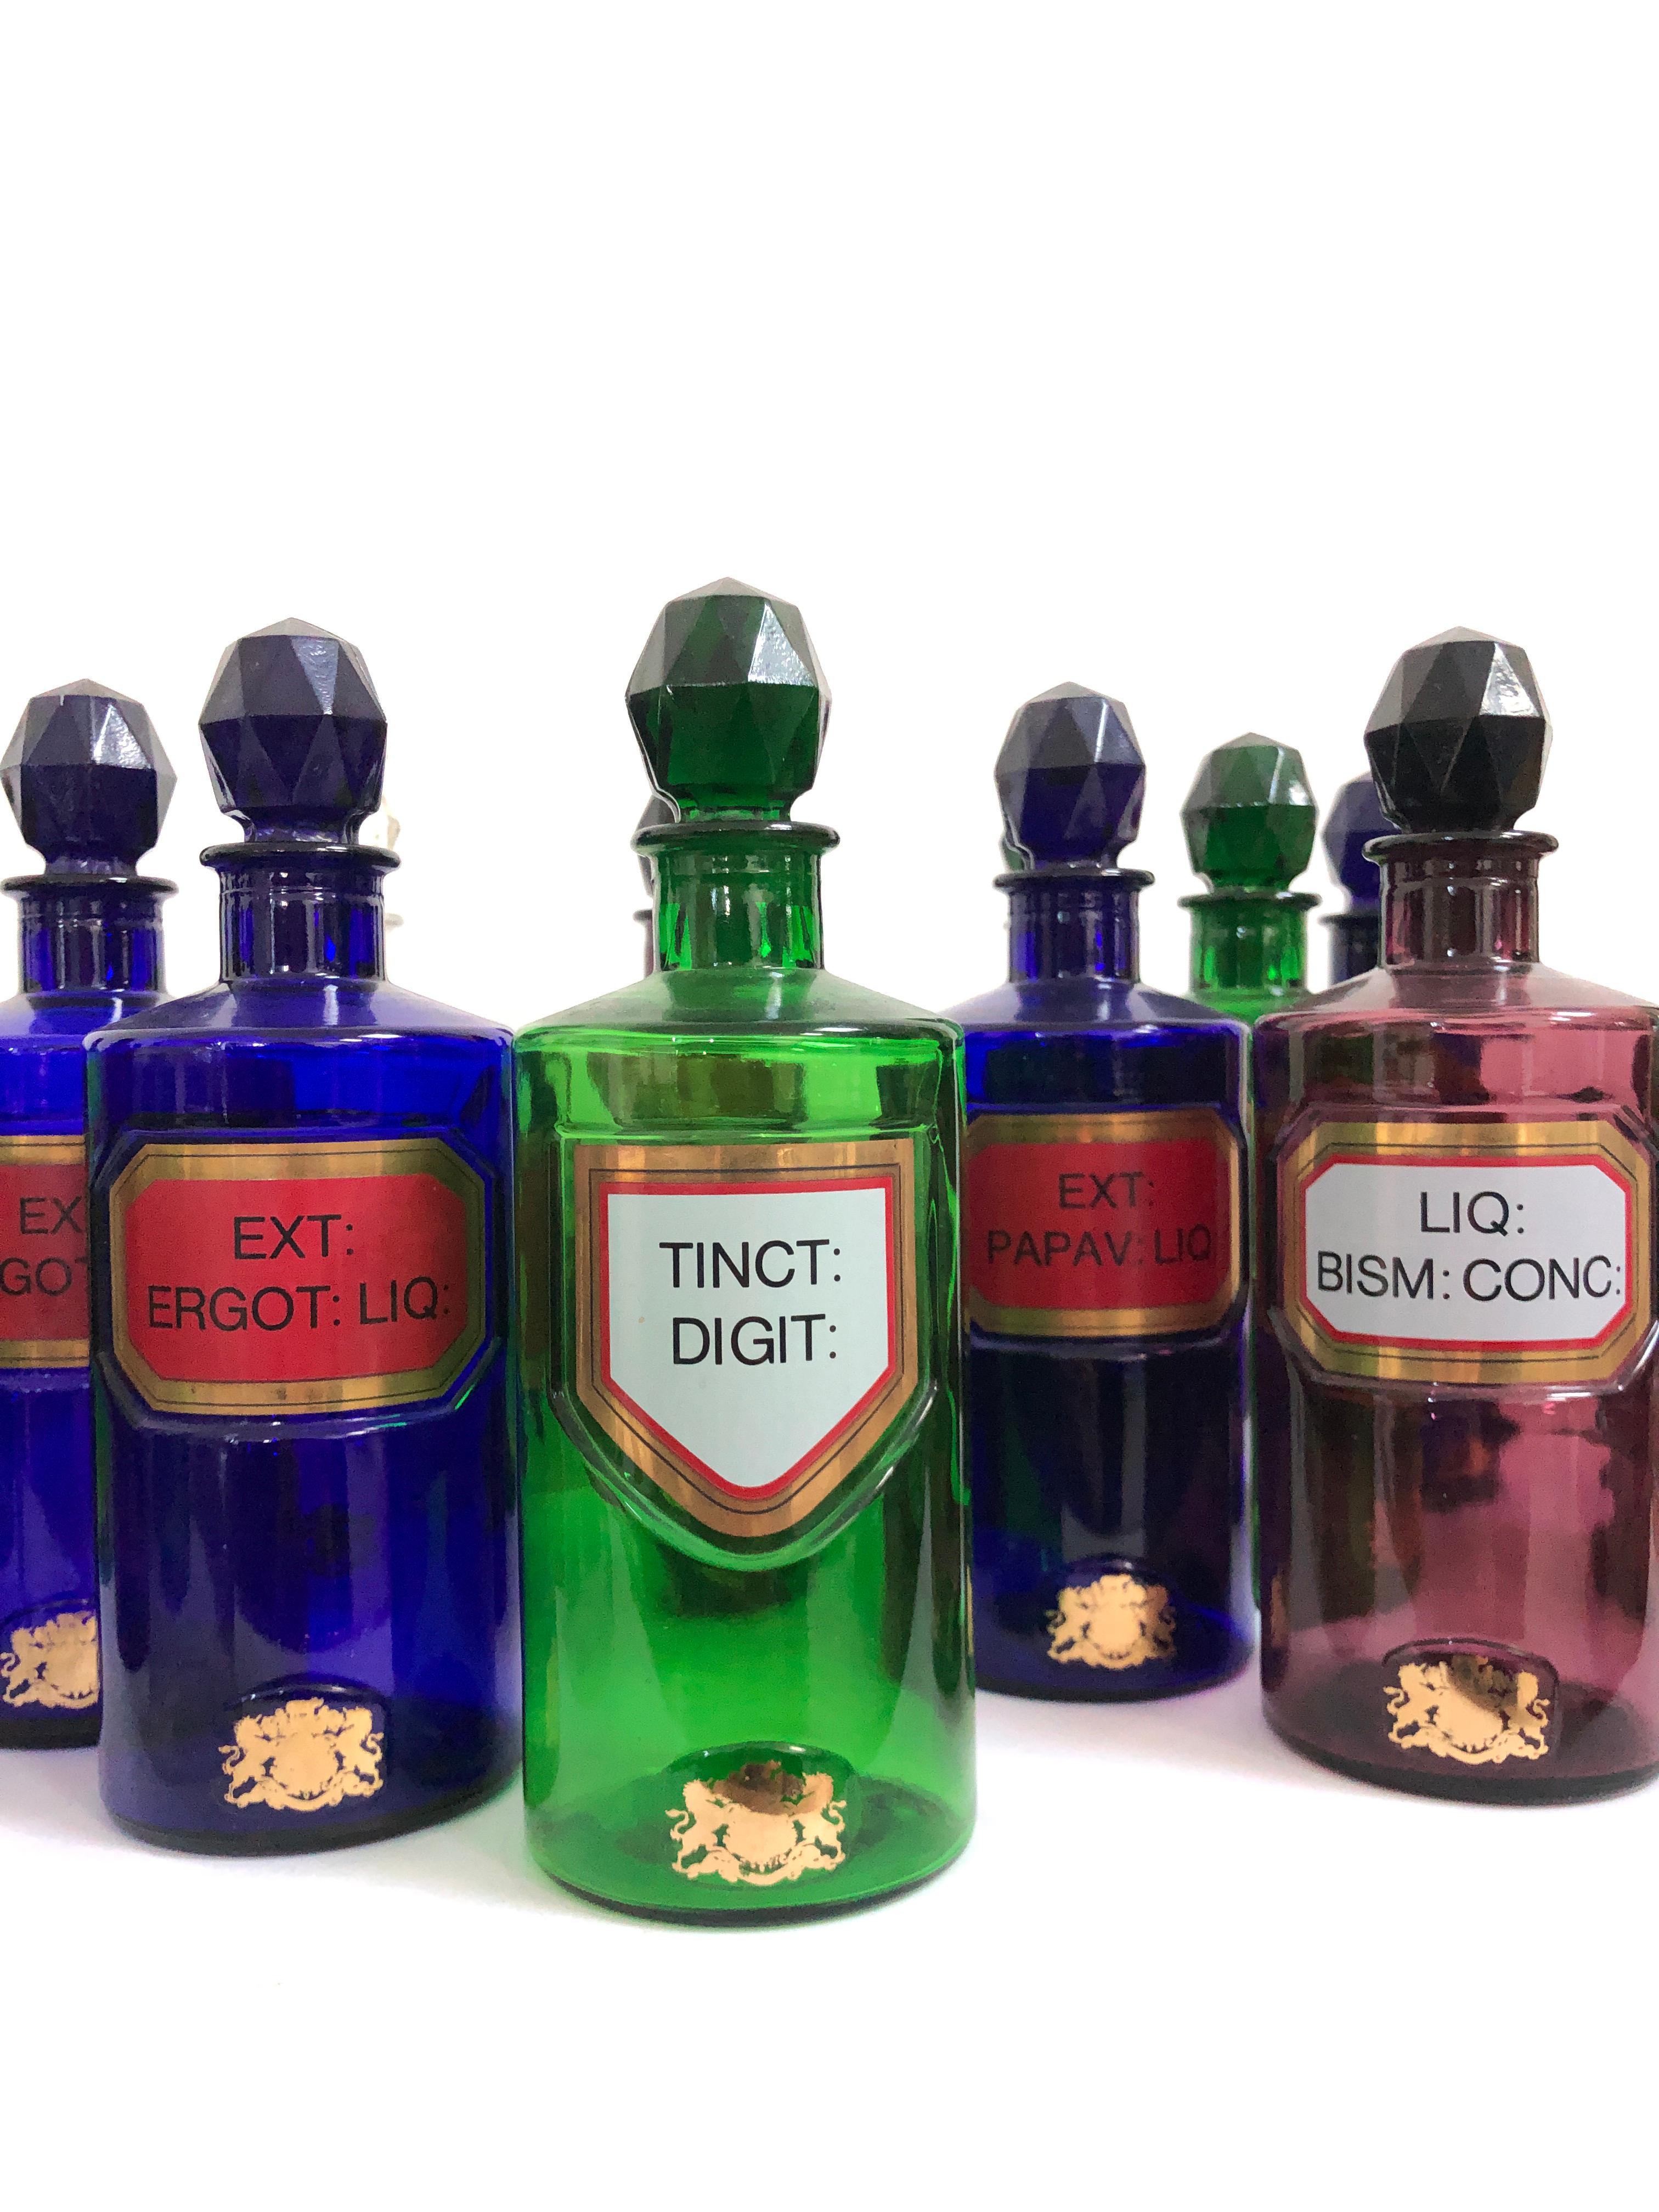 - A rare set of Royal Pharmaceutical society collectors apothecary bottles, English mid-twentieth century.
- There are 5 runs of 6 bottles, 30 bottles in total. Two of the runs are clear glass, one is cobalt blue, one purple and one green. 
- Each